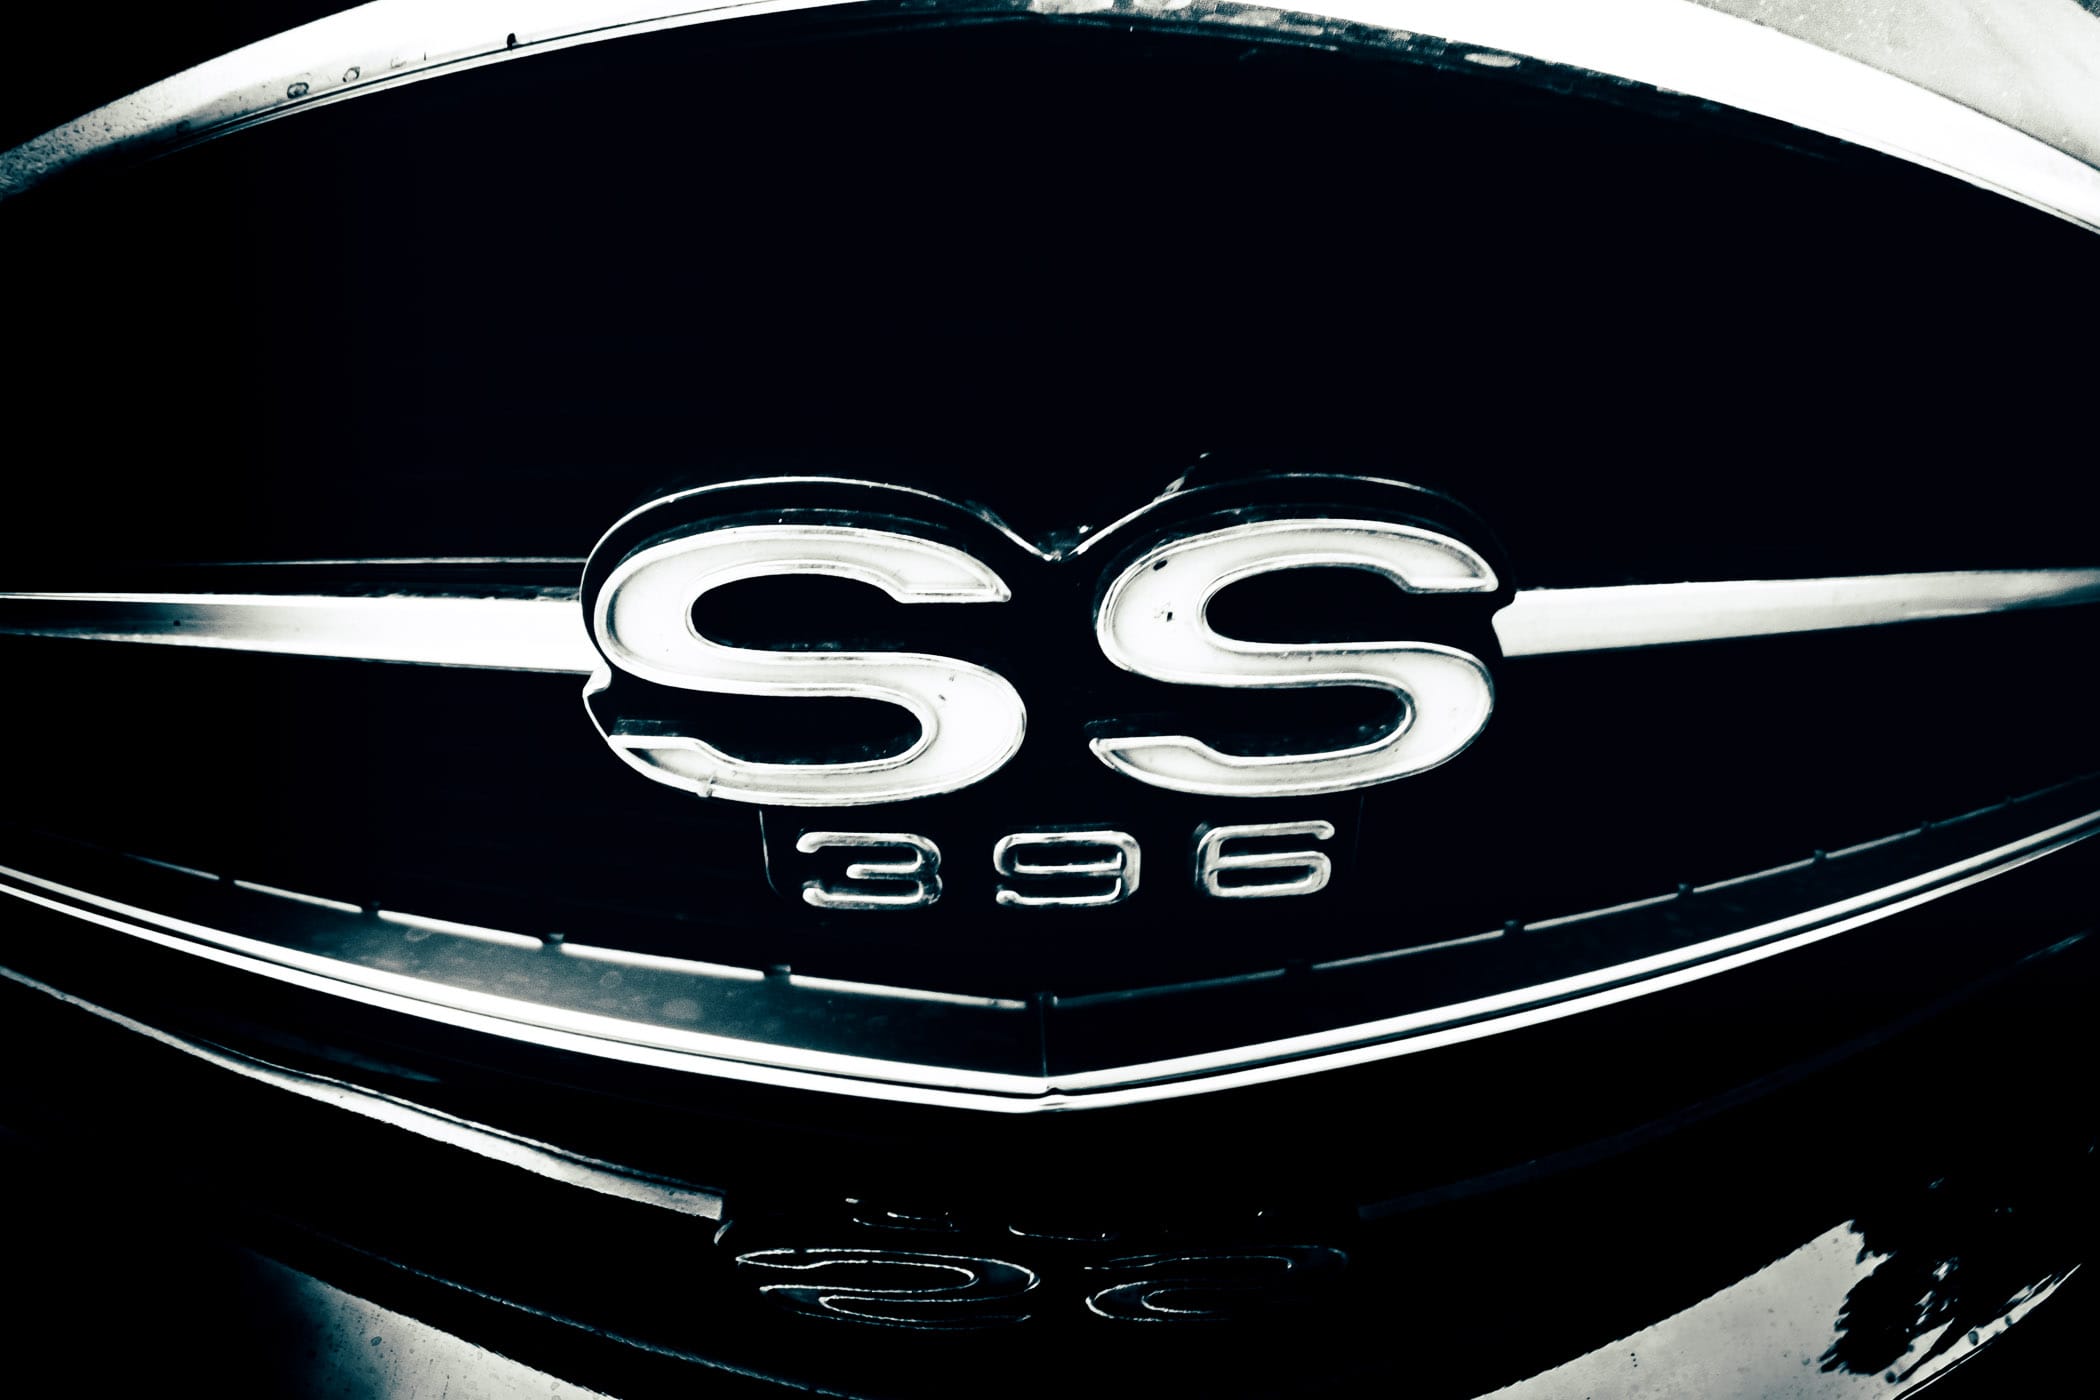 The Super Sport emblem on a 1969 Chevrolet Chevelle, spotted in McKinney, Texas.